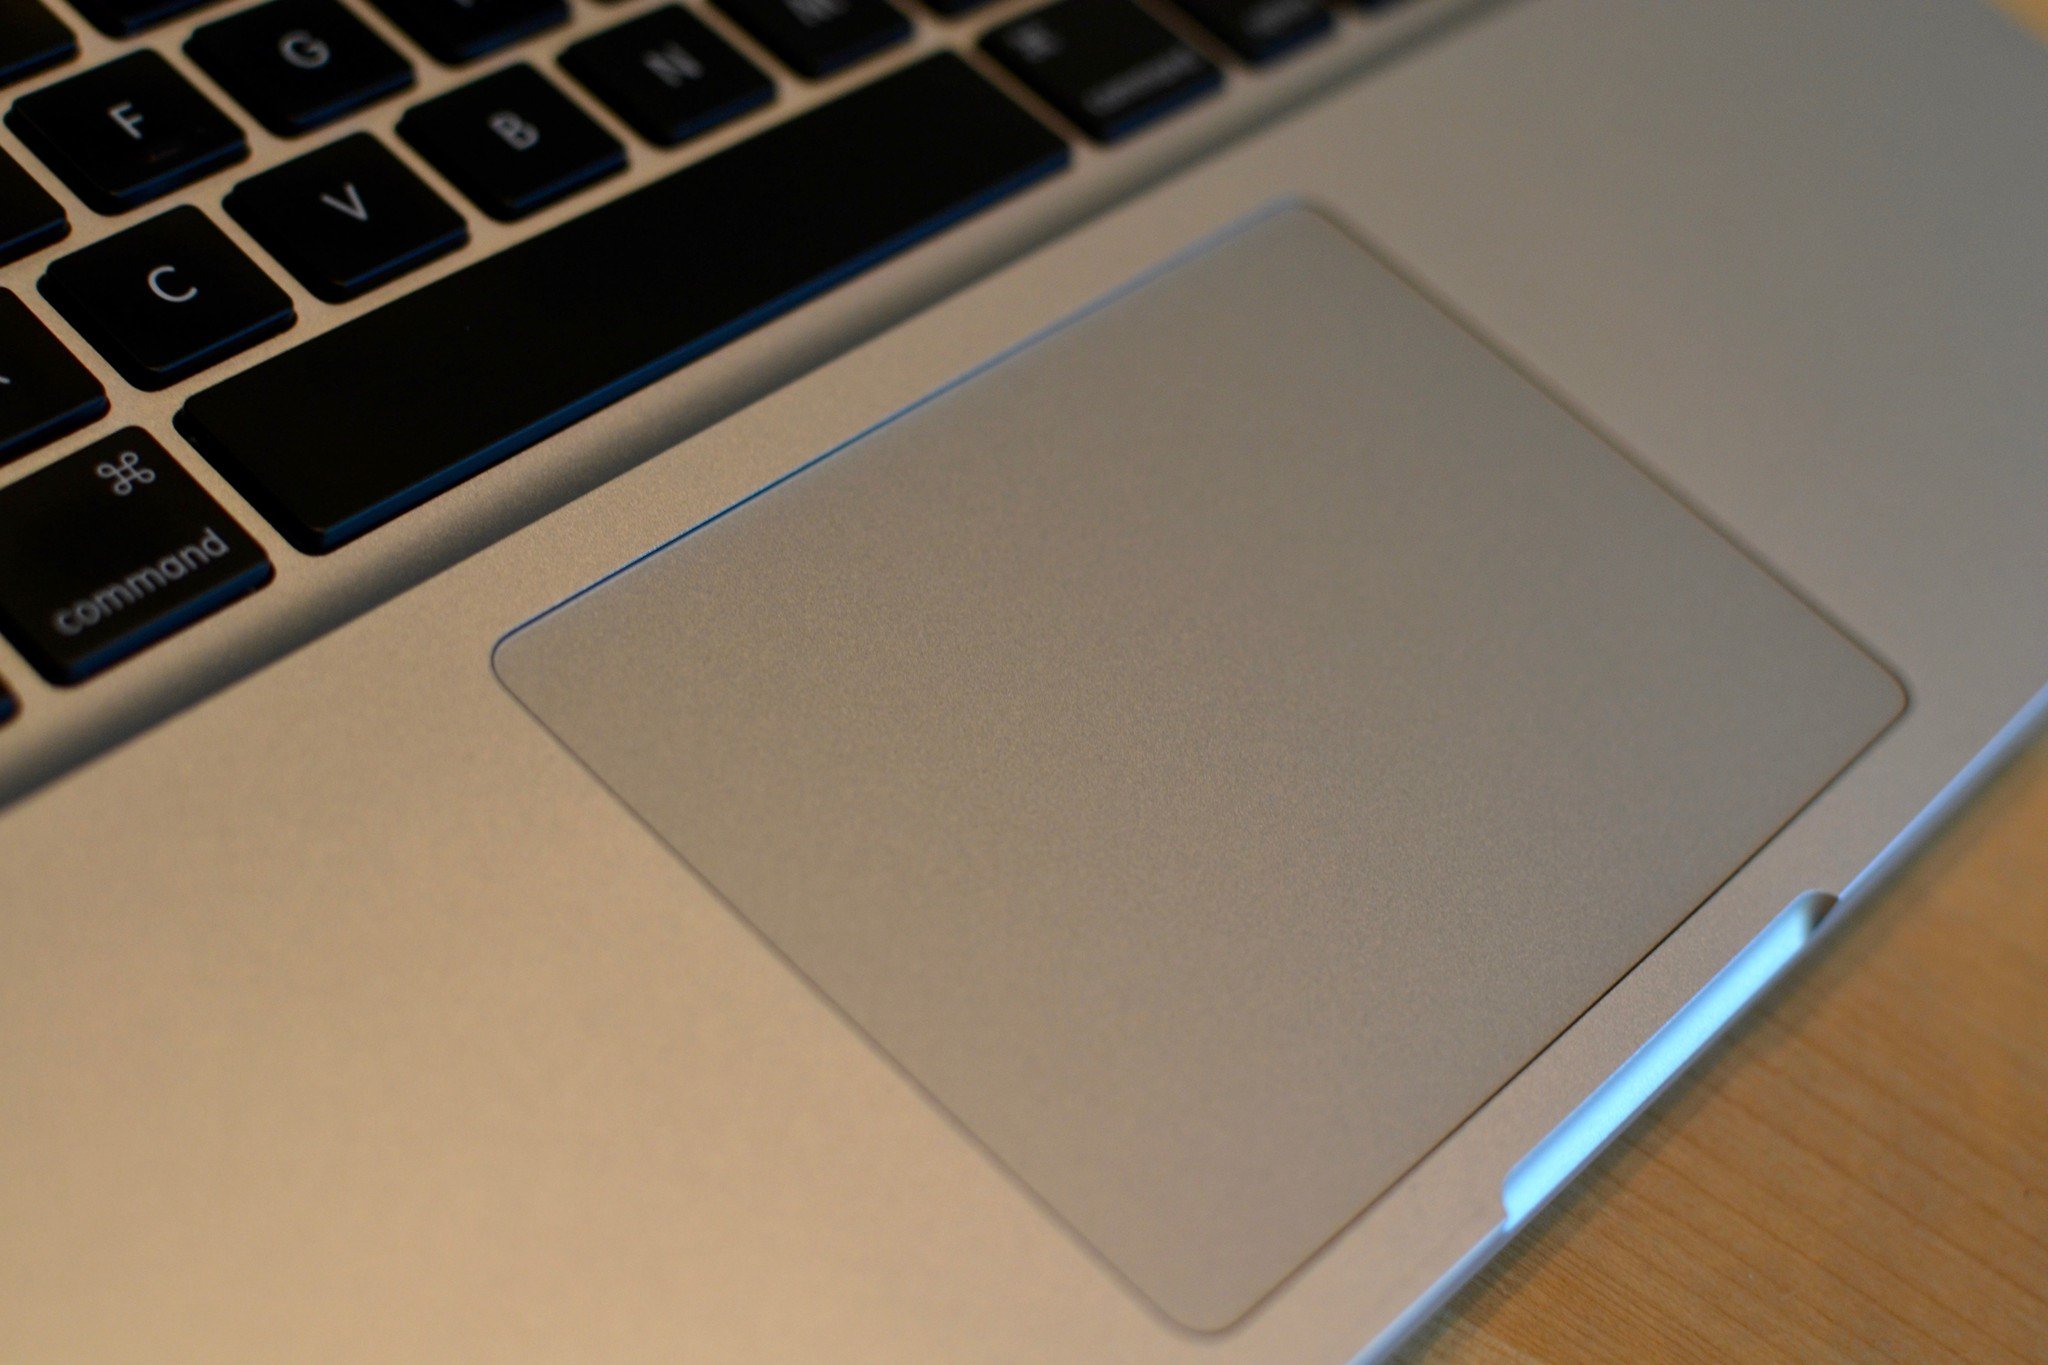 The trackpad on a MacBook Pro